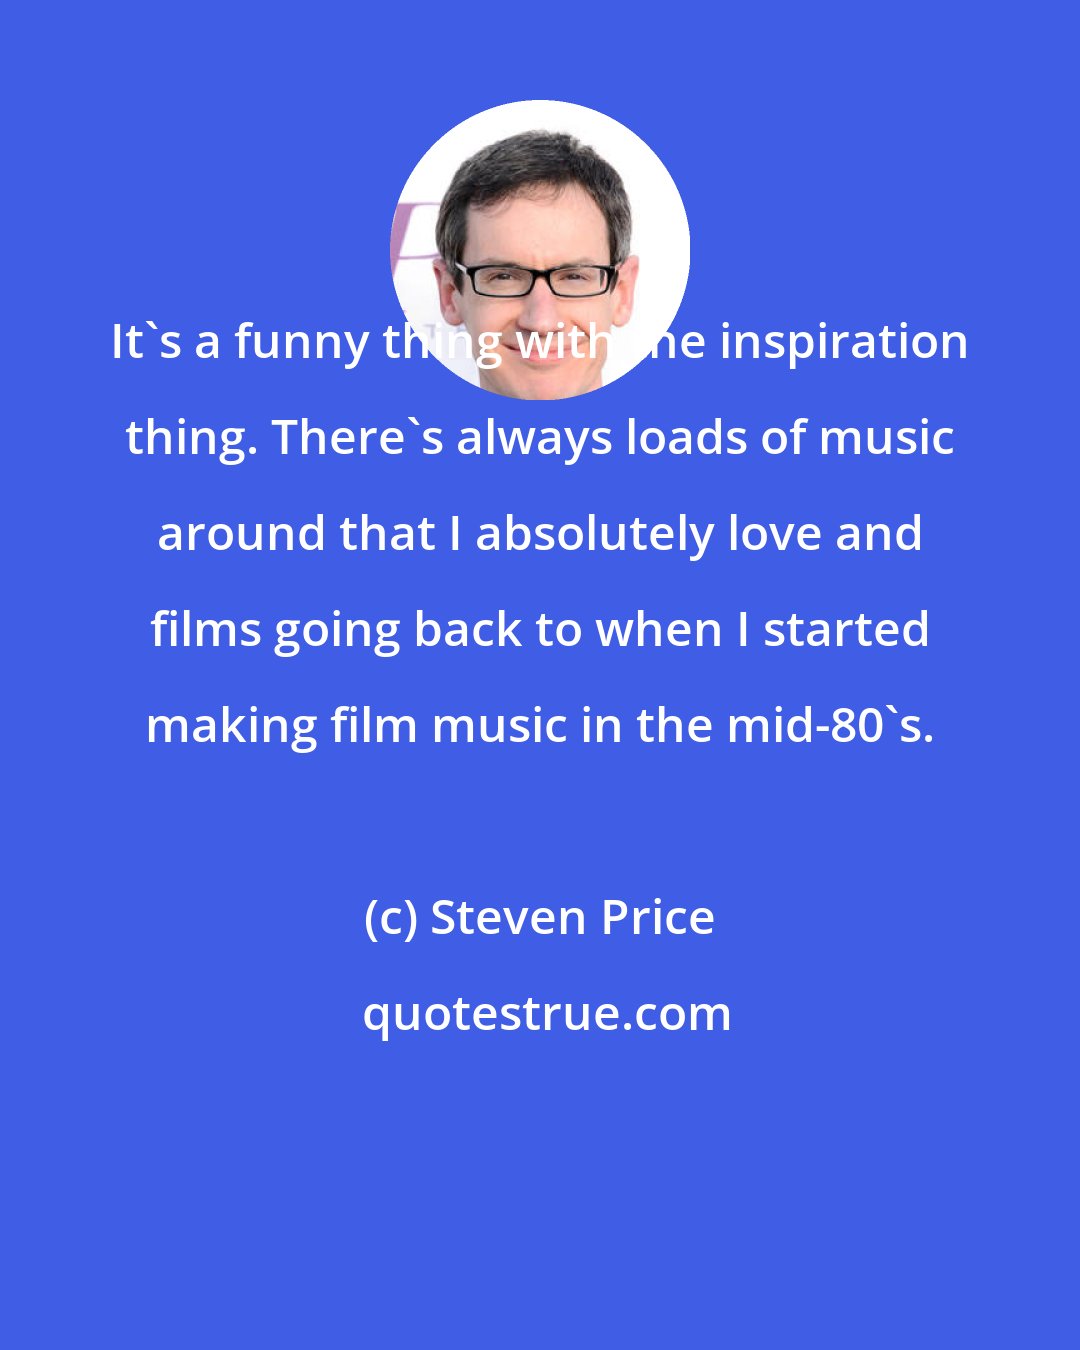 Steven Price: It's a funny thing with the inspiration thing. There's always loads of music around that I absolutely love and films going back to when I started making film music in the mid-80's.